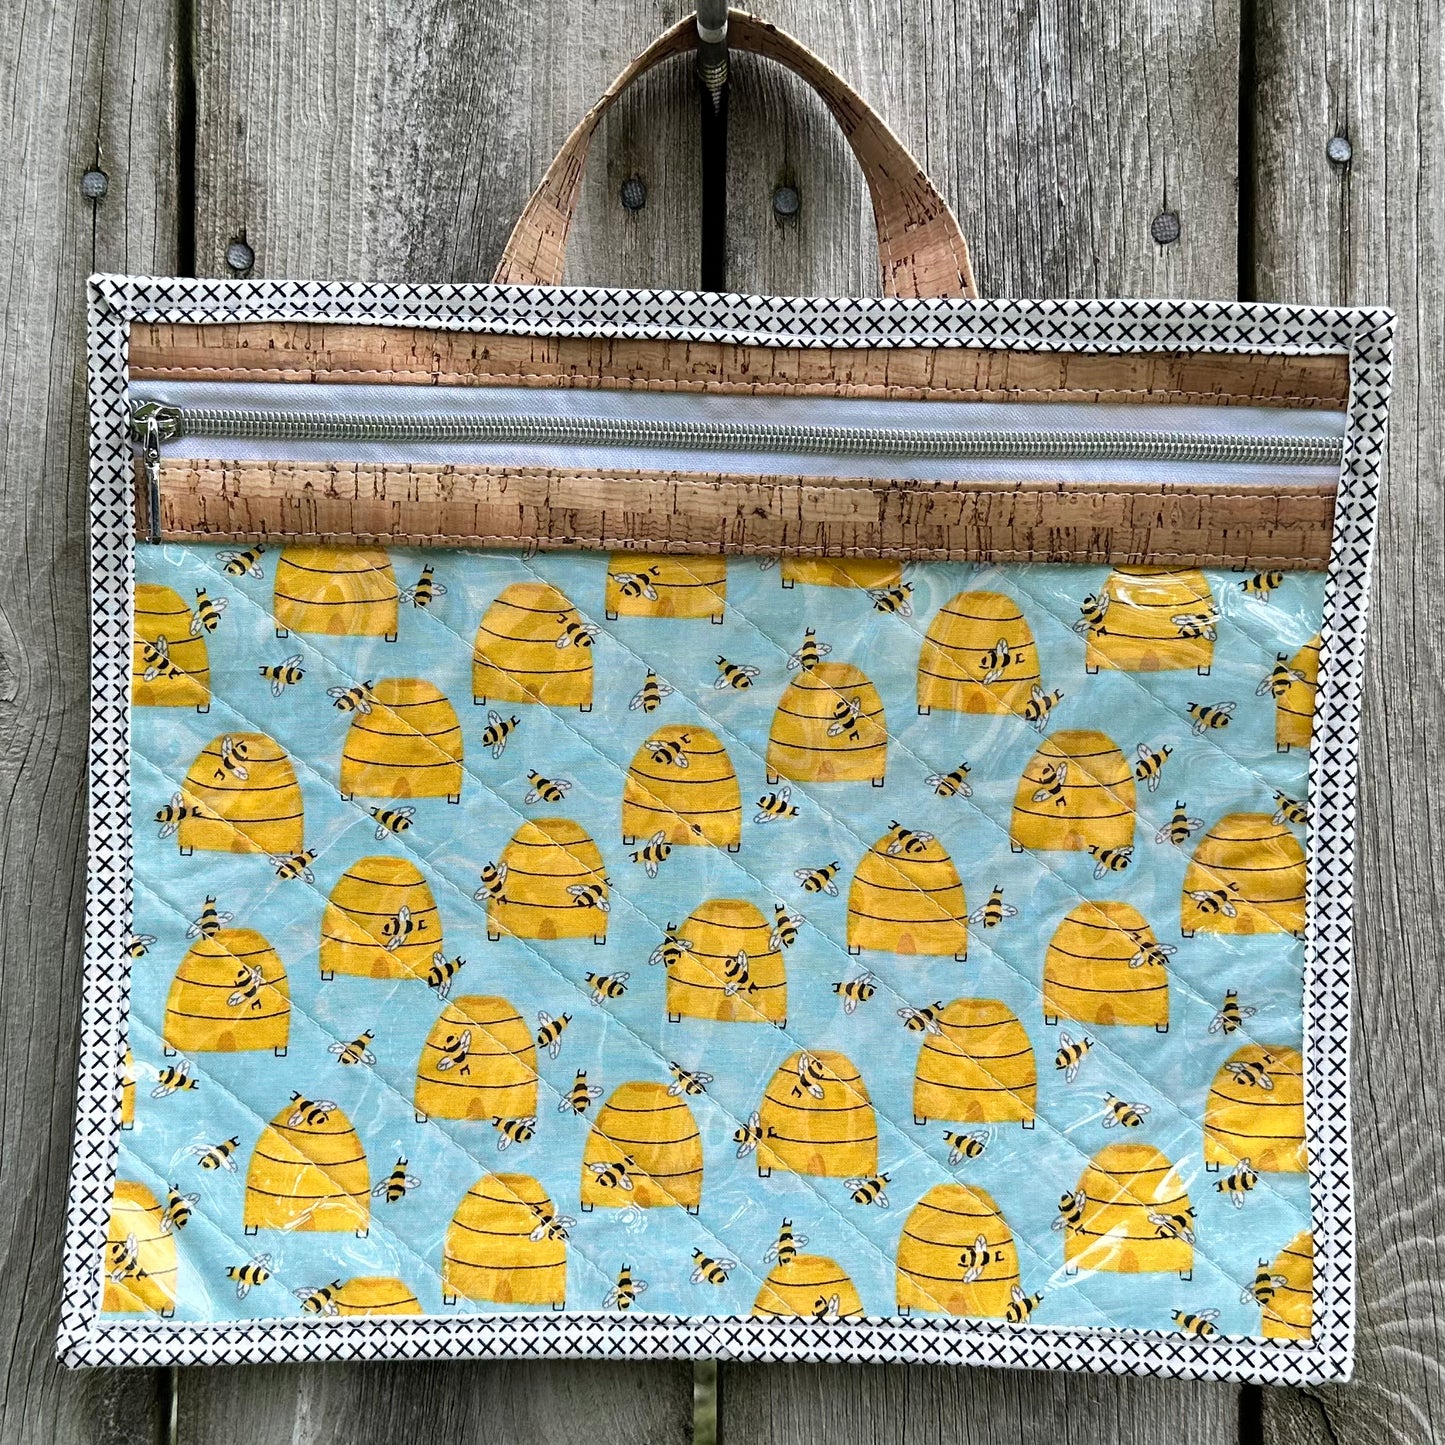 Medium Vinyl Front Buzzy Bees Project Bag by Whiskey Glass Designs